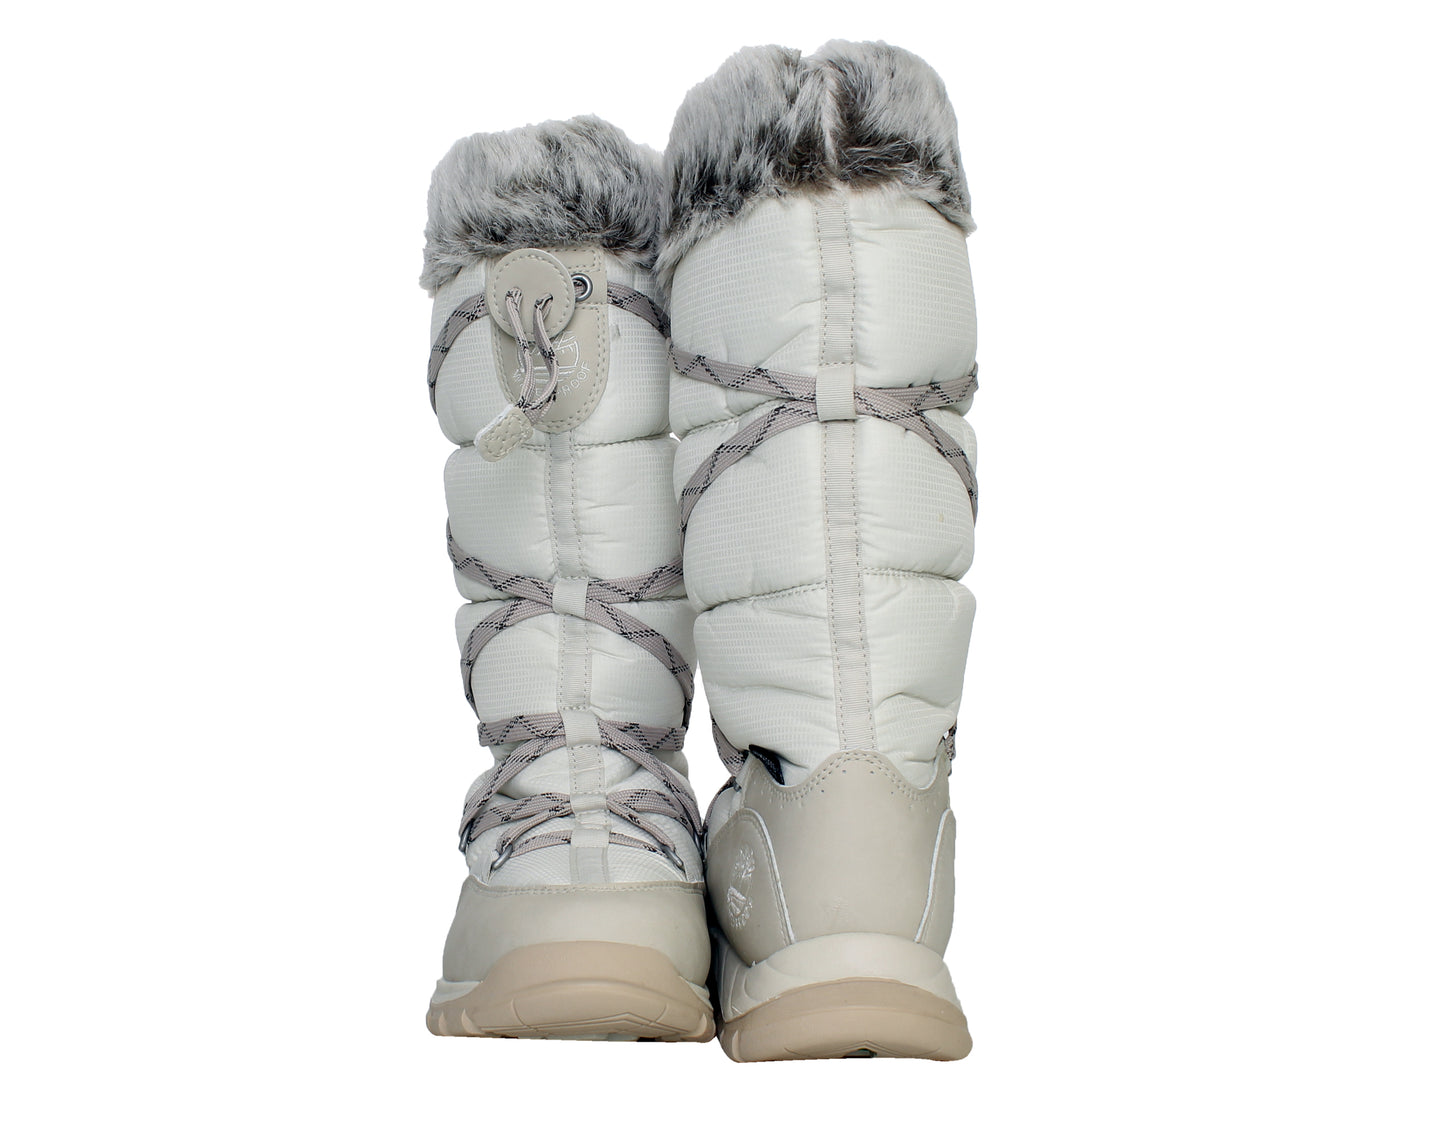 Timberland Chillberg Over the Chill Waterproof Winter White Women's Boots 2161R